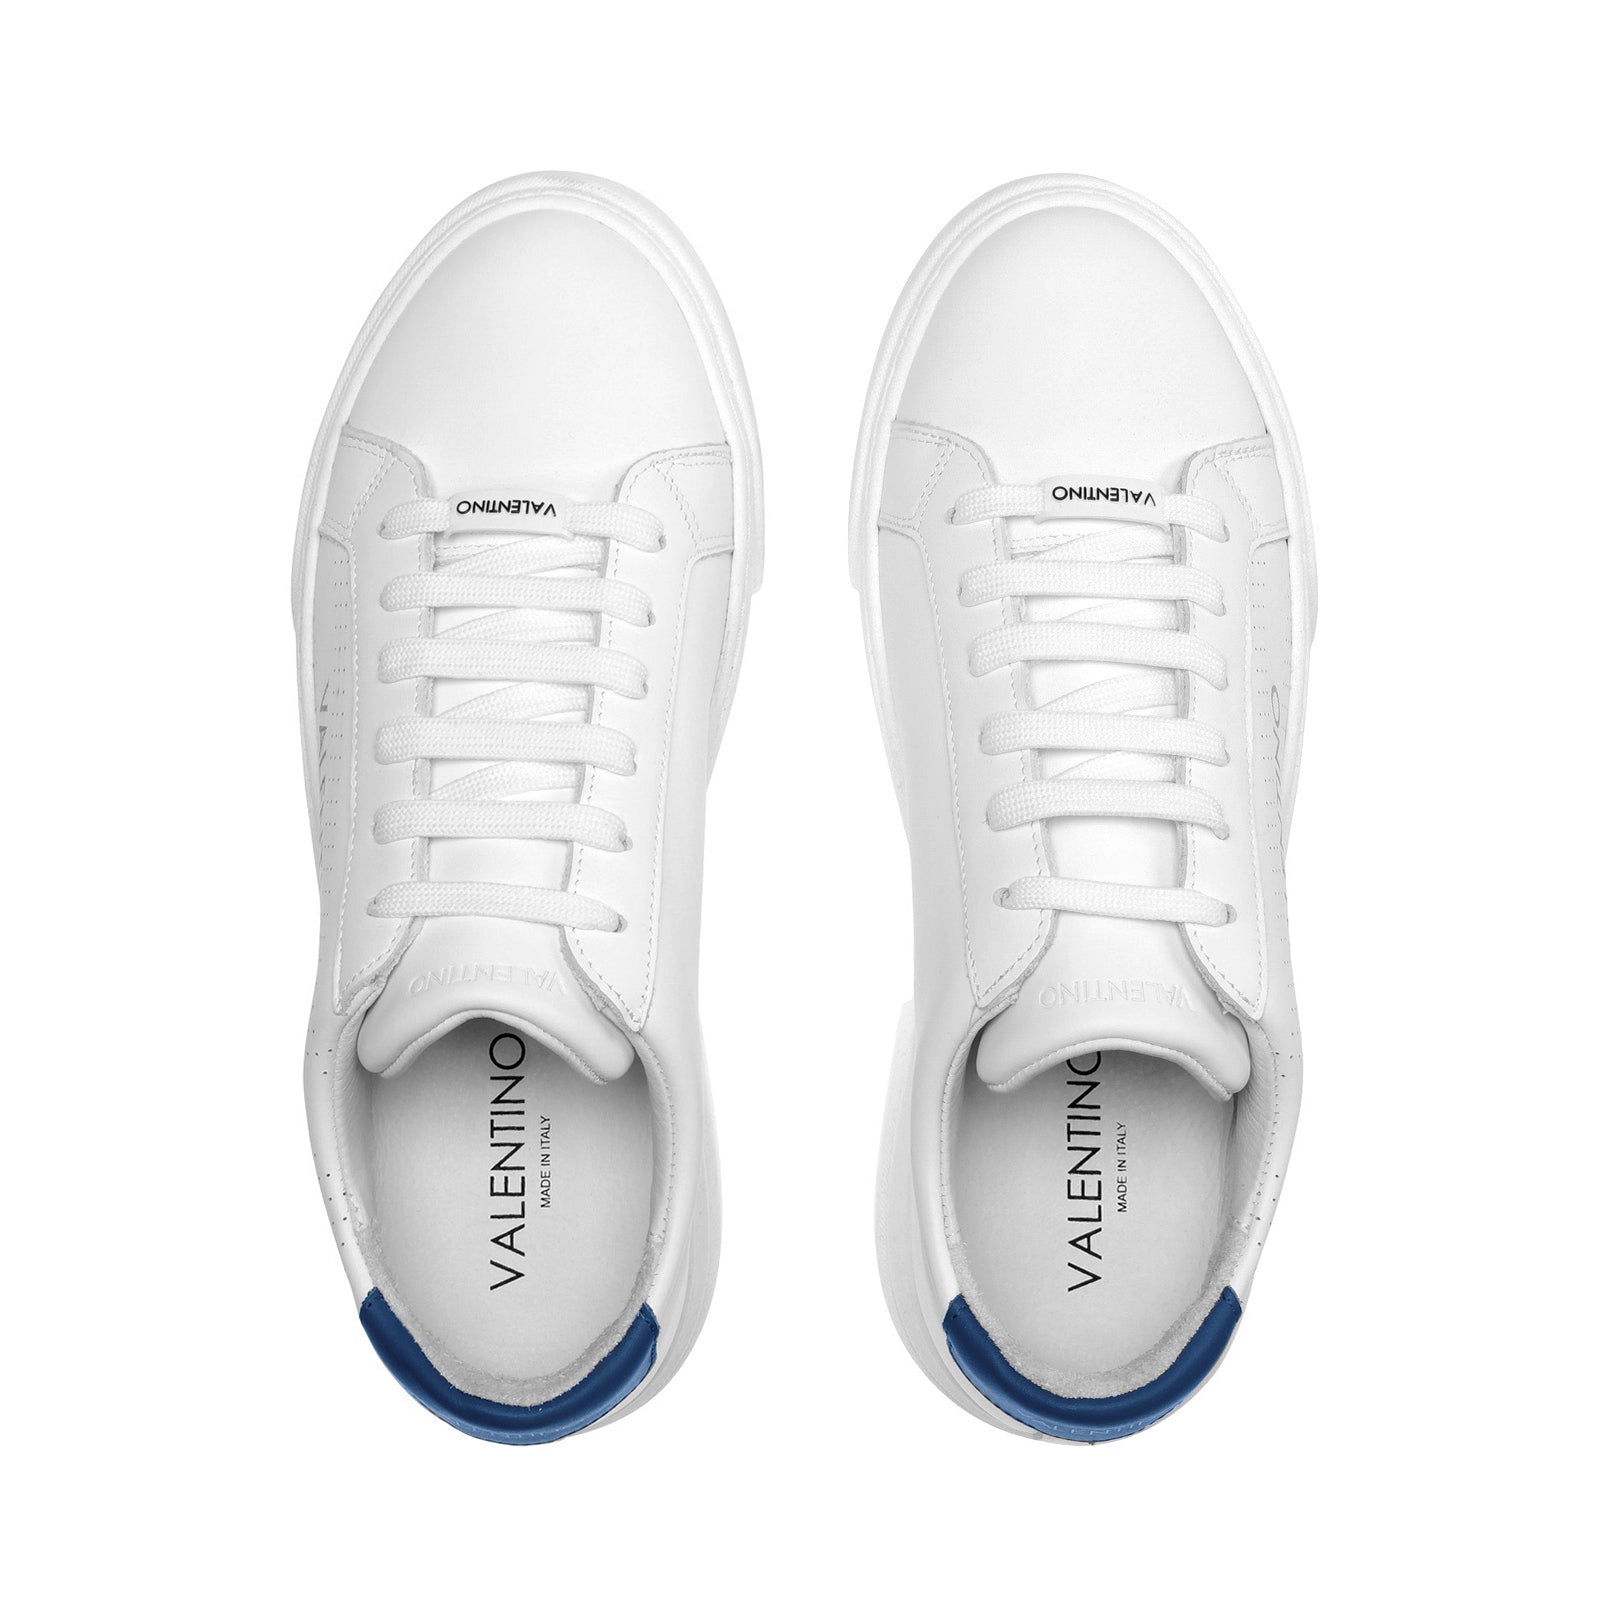 Valentino Men's Sneakers White Leather an Blue Insert Valentino UAE